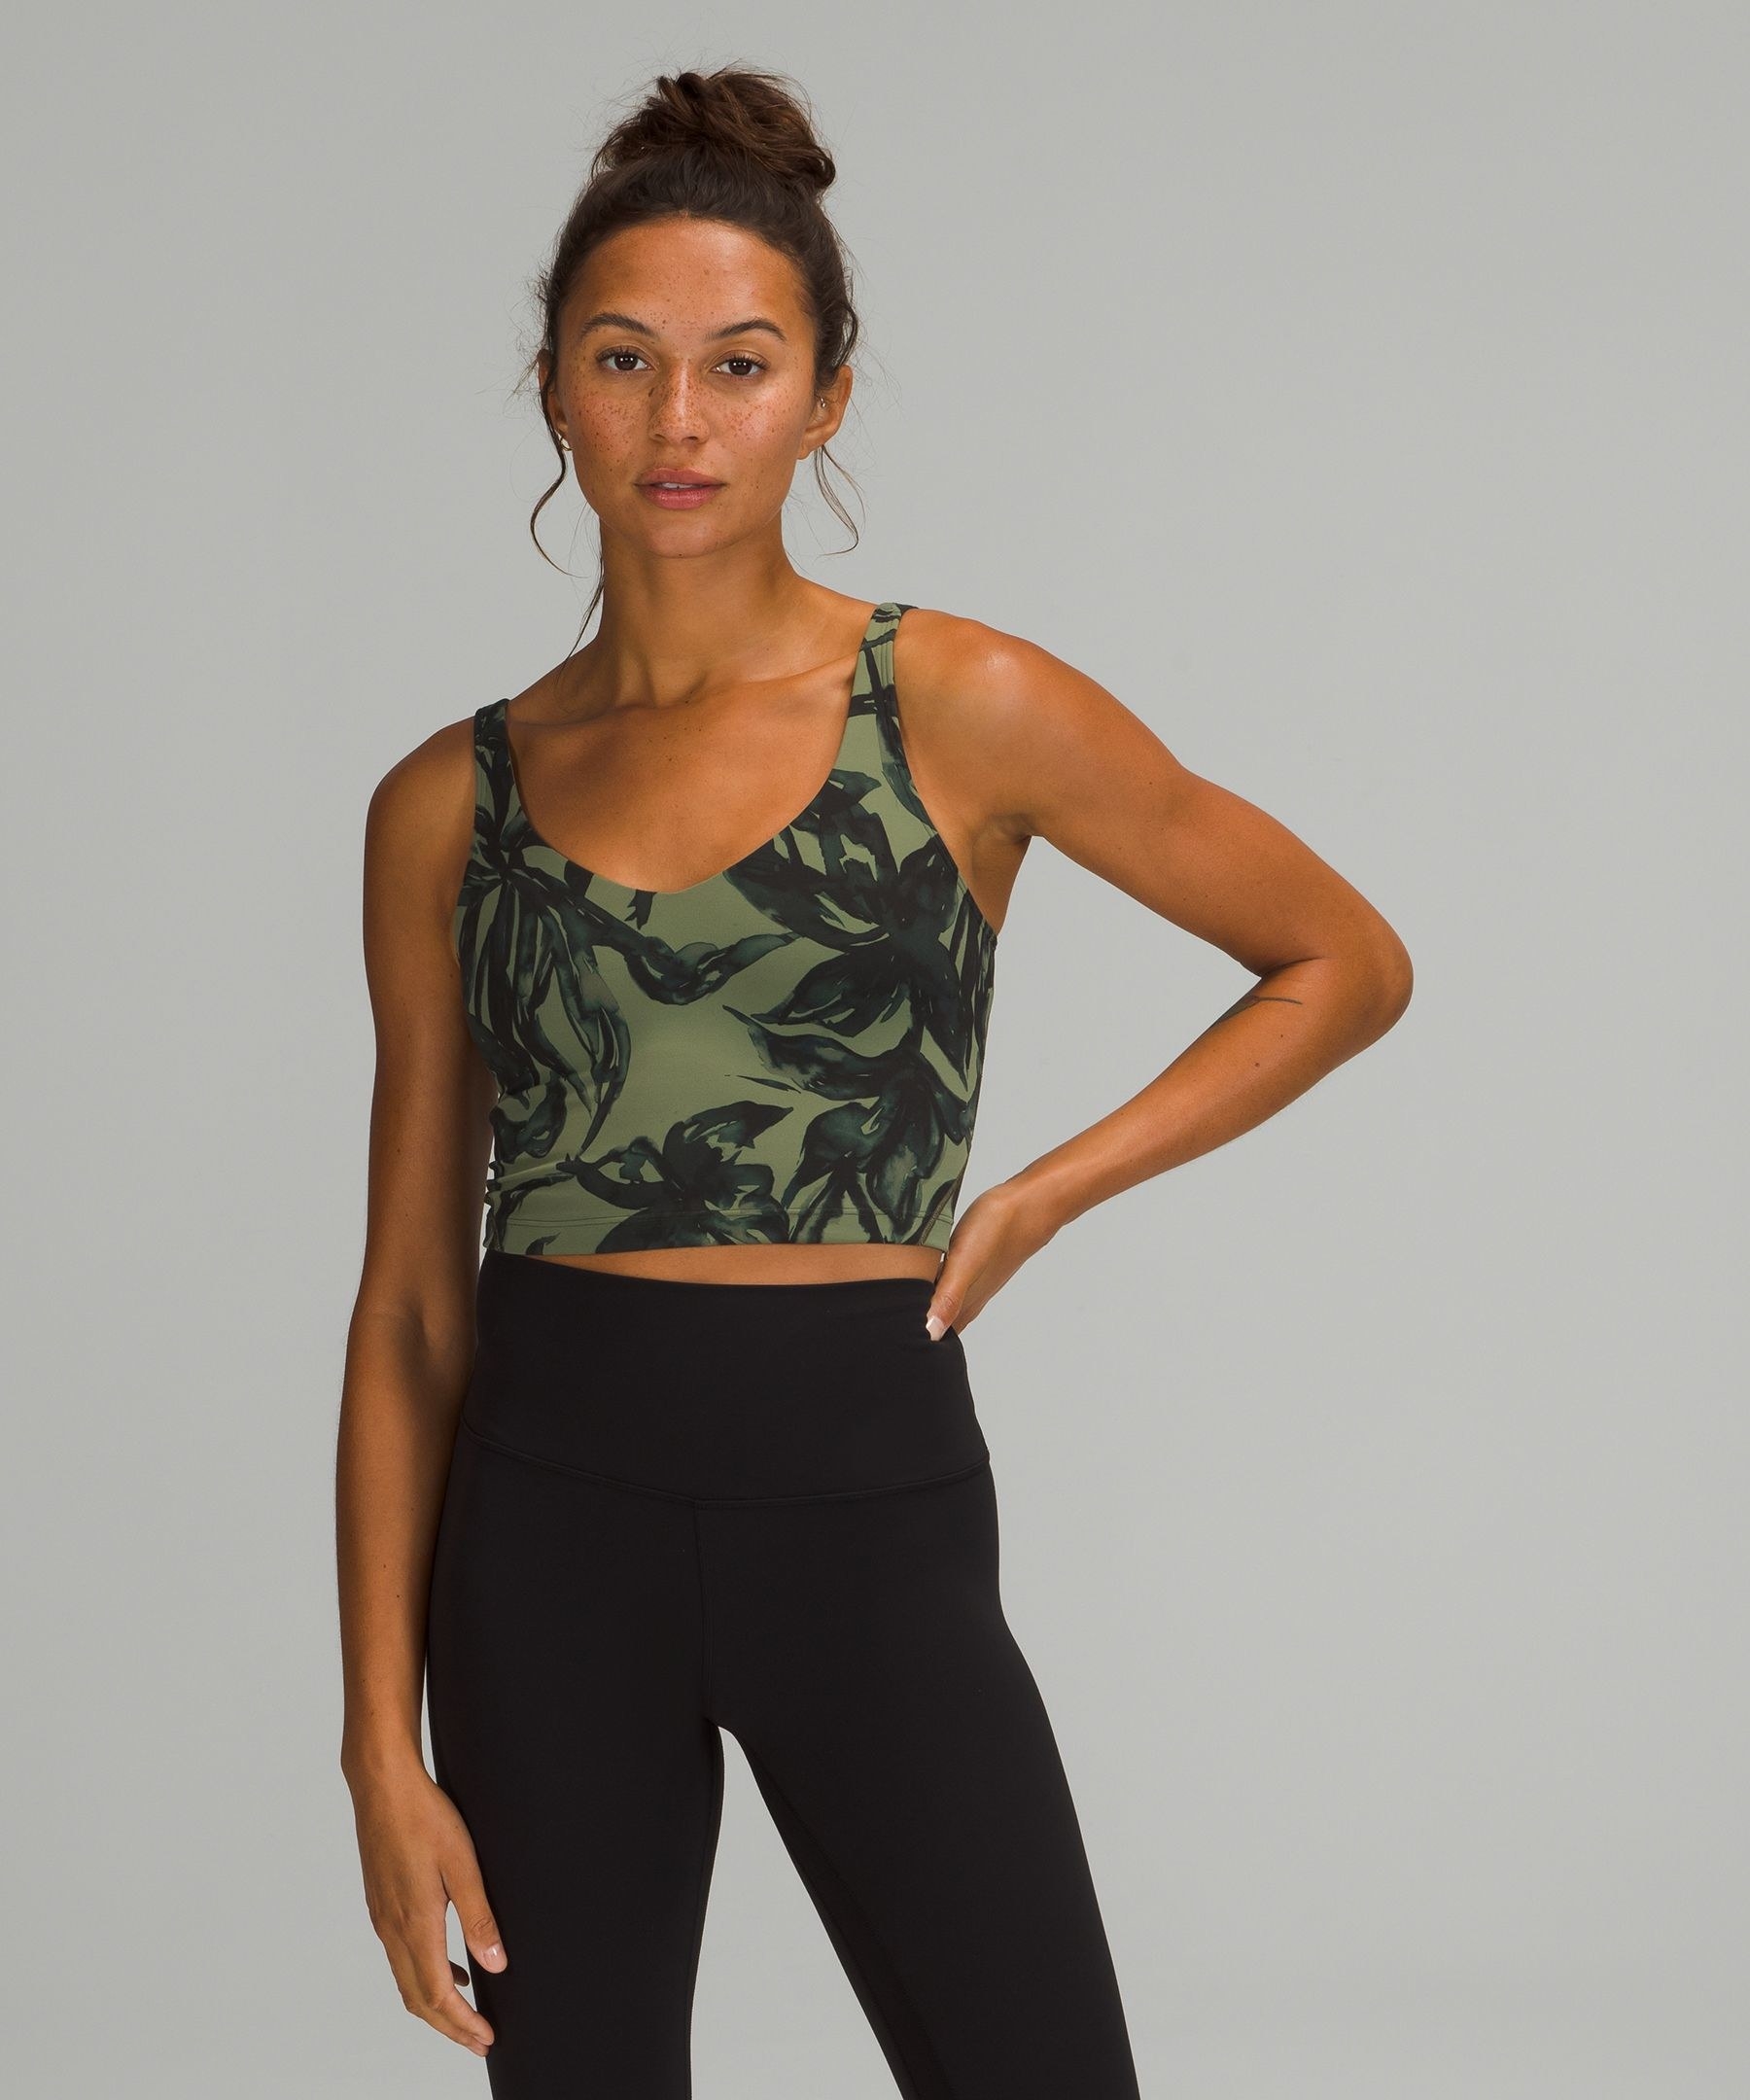 A model in a cropped green tank top